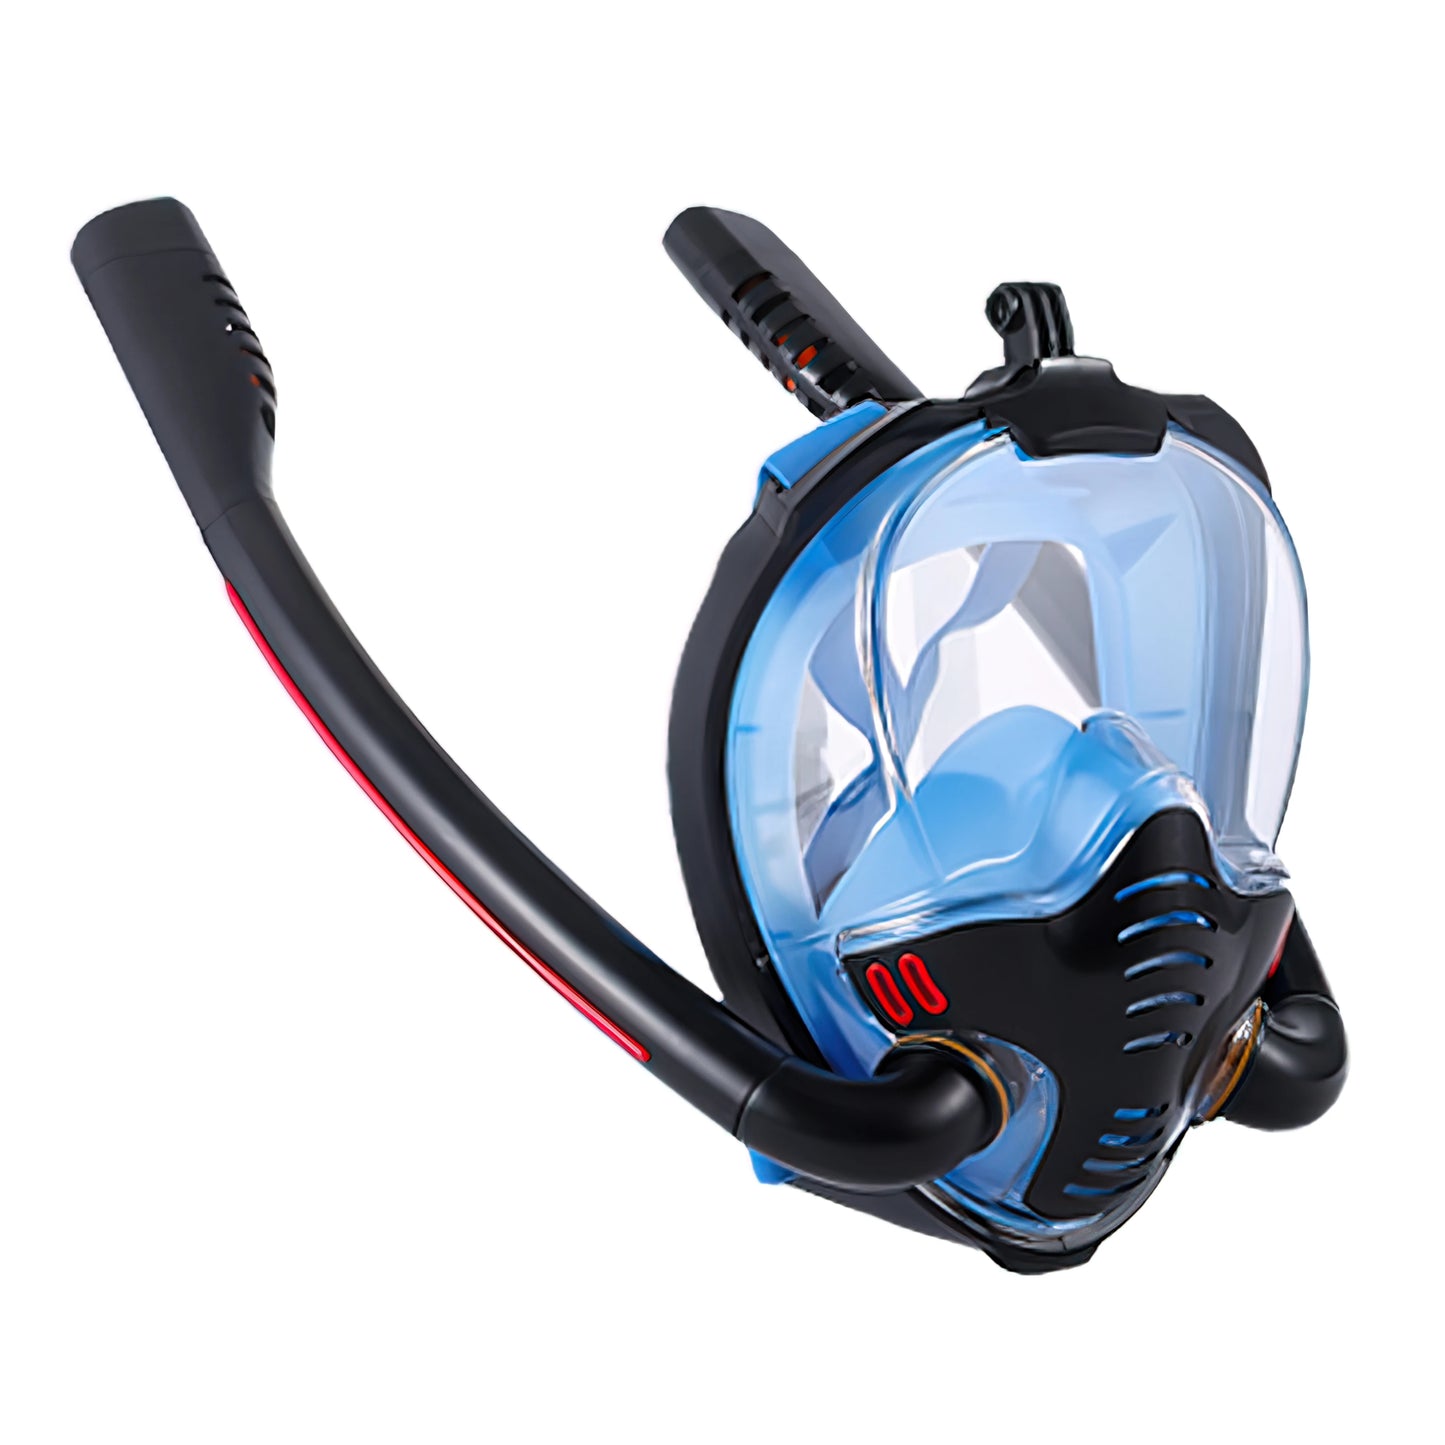 Double Tube Anti-Fog Snorkeling Mask-Self Contained Underwater Breathing-Wide View